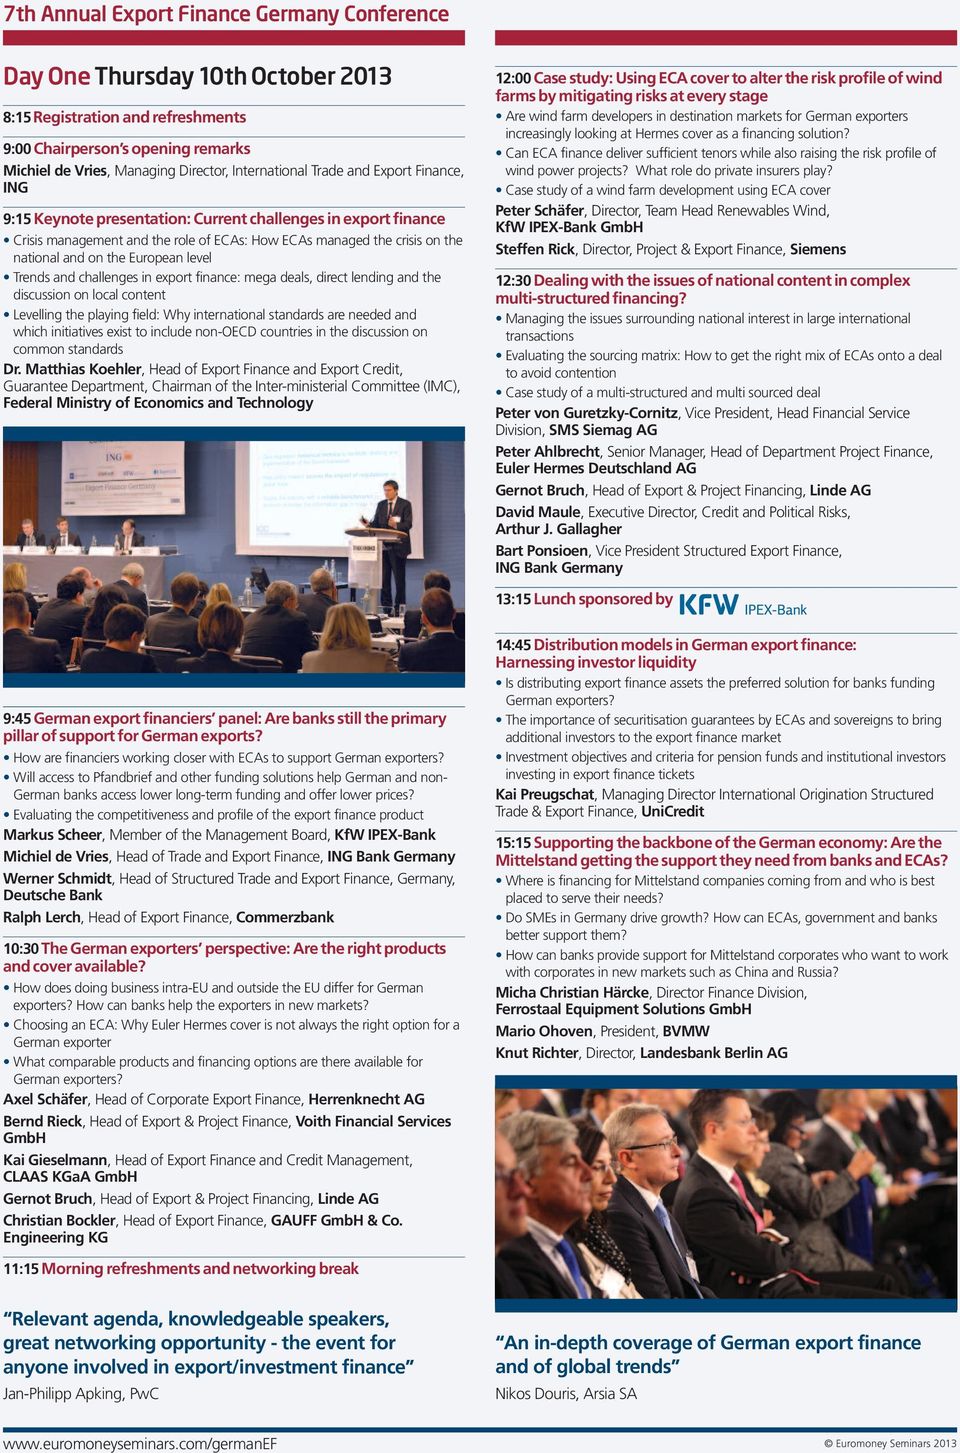 the European level Trends and challenges in export finance: mega deals, direct lending and the discussion on local content Levelling the playing field: Why international standards are needed and